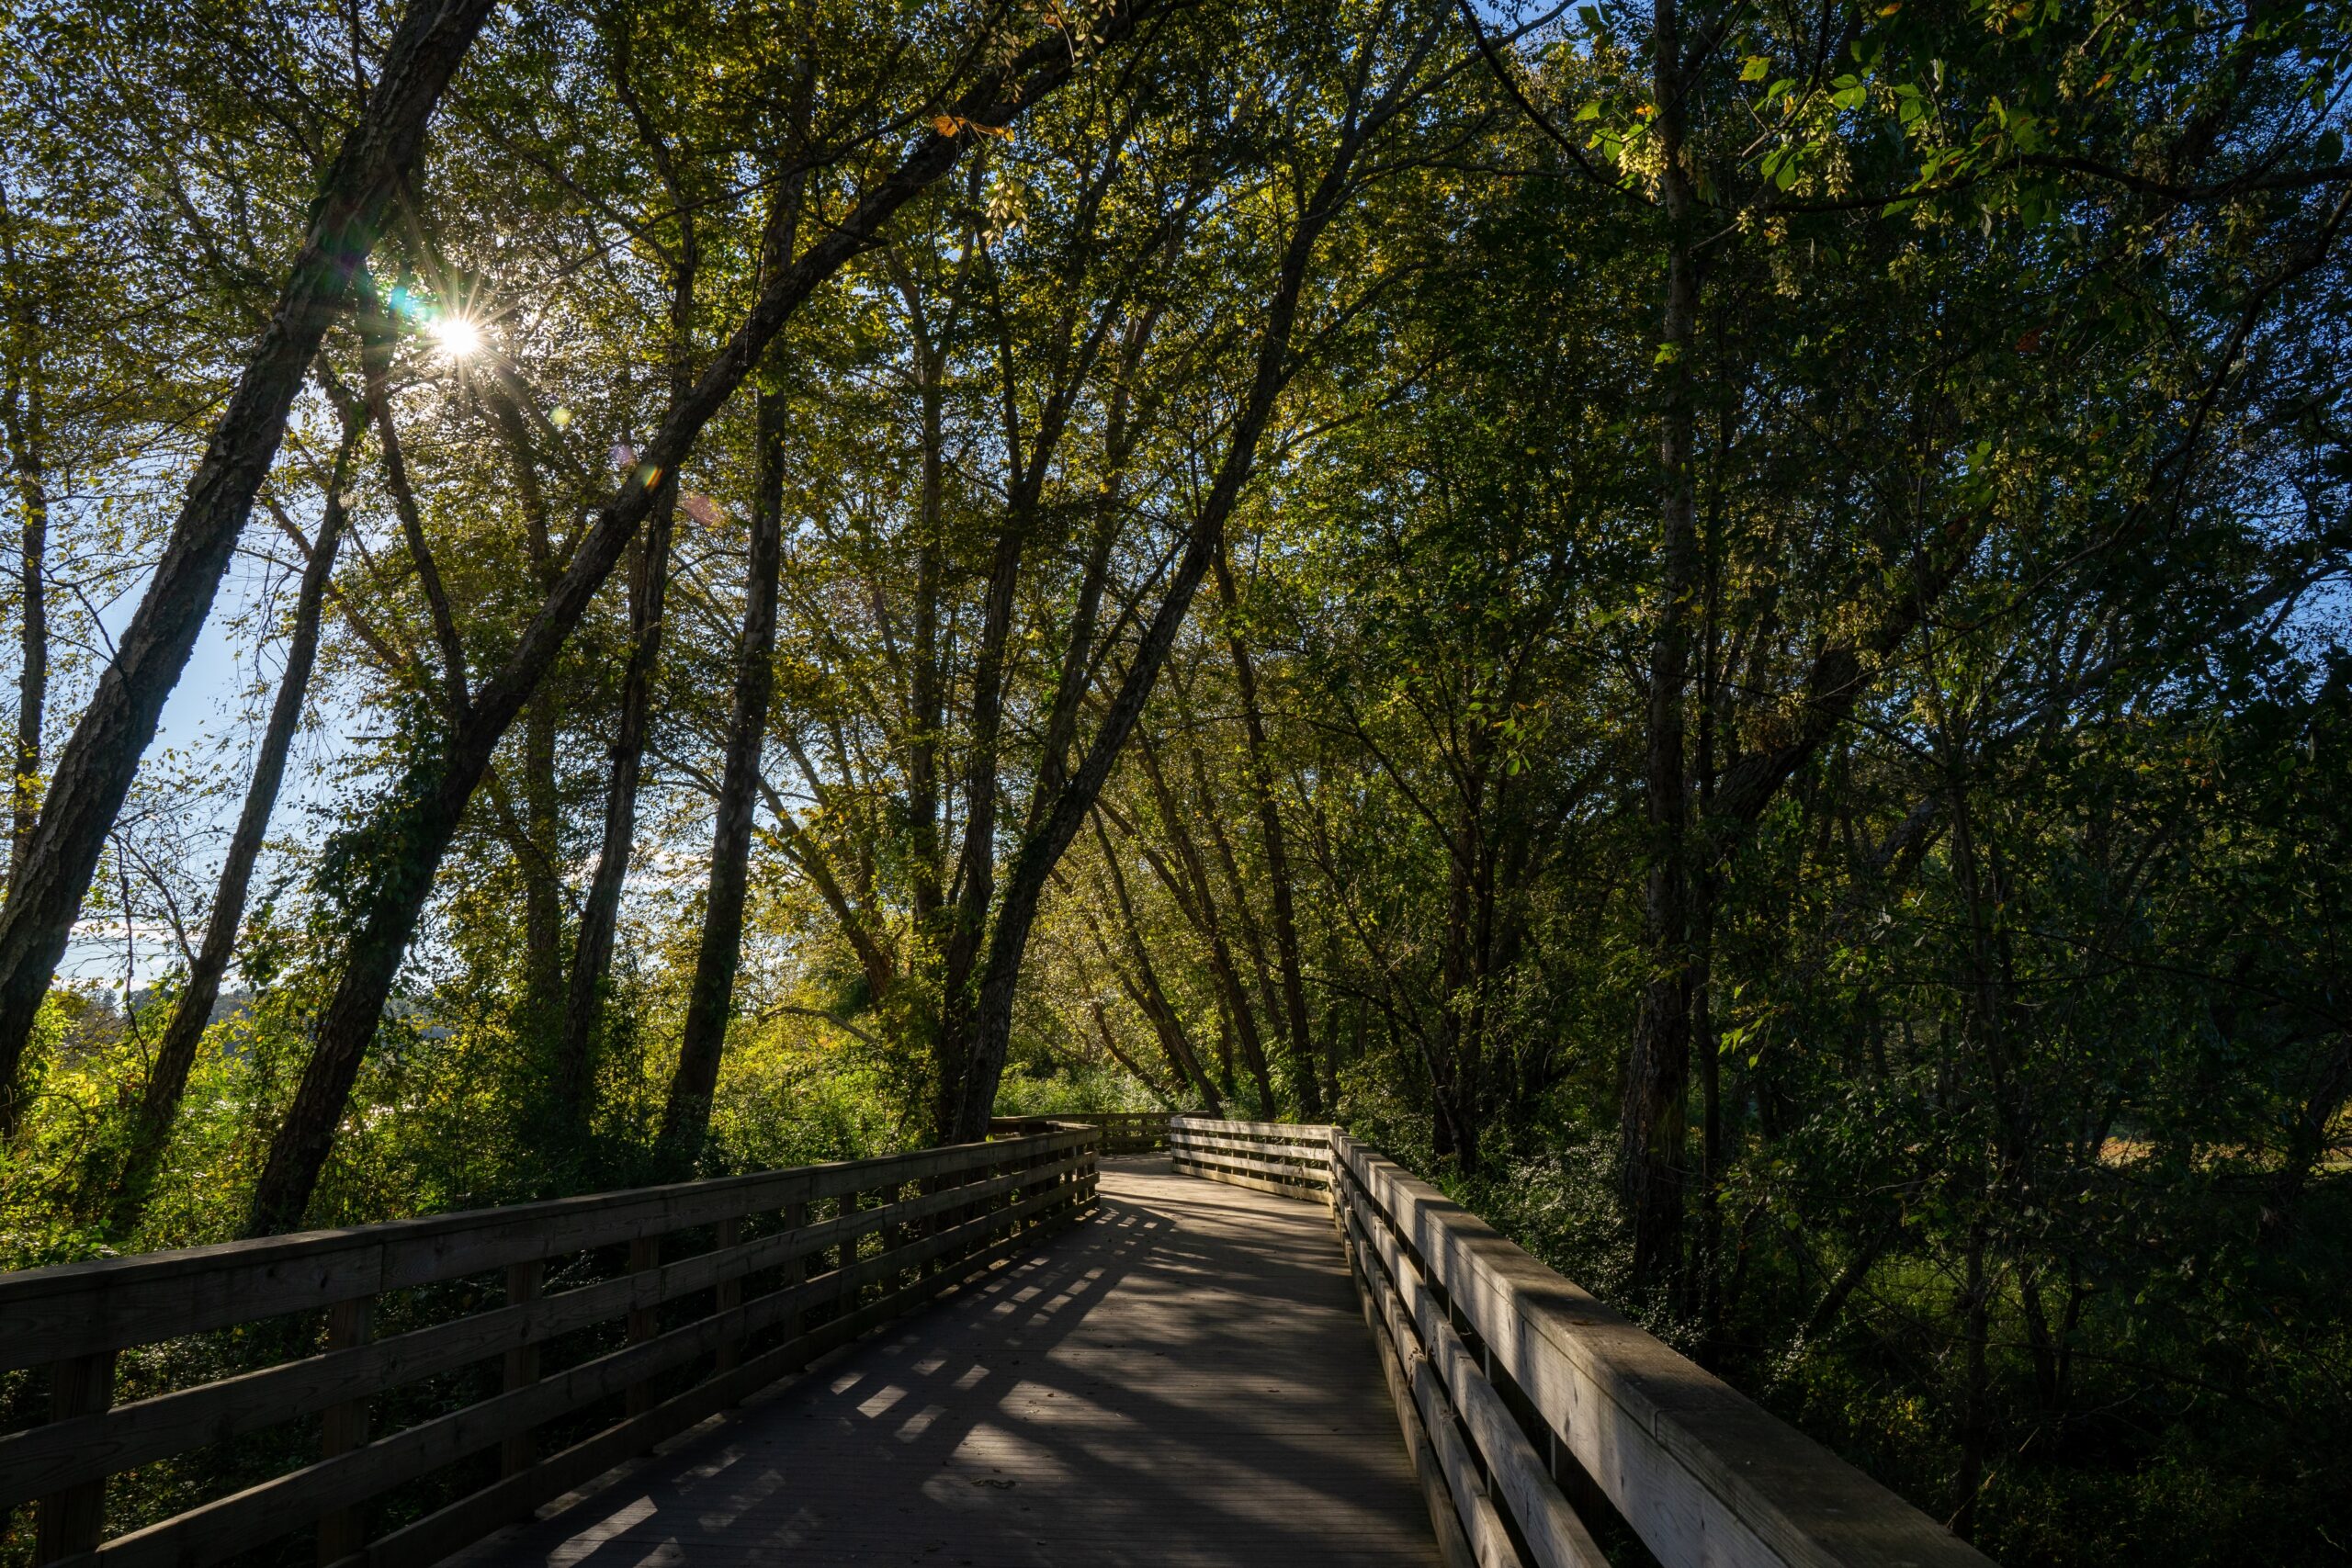 Sexual Assault Reported on Roswell Riverwalk Trail